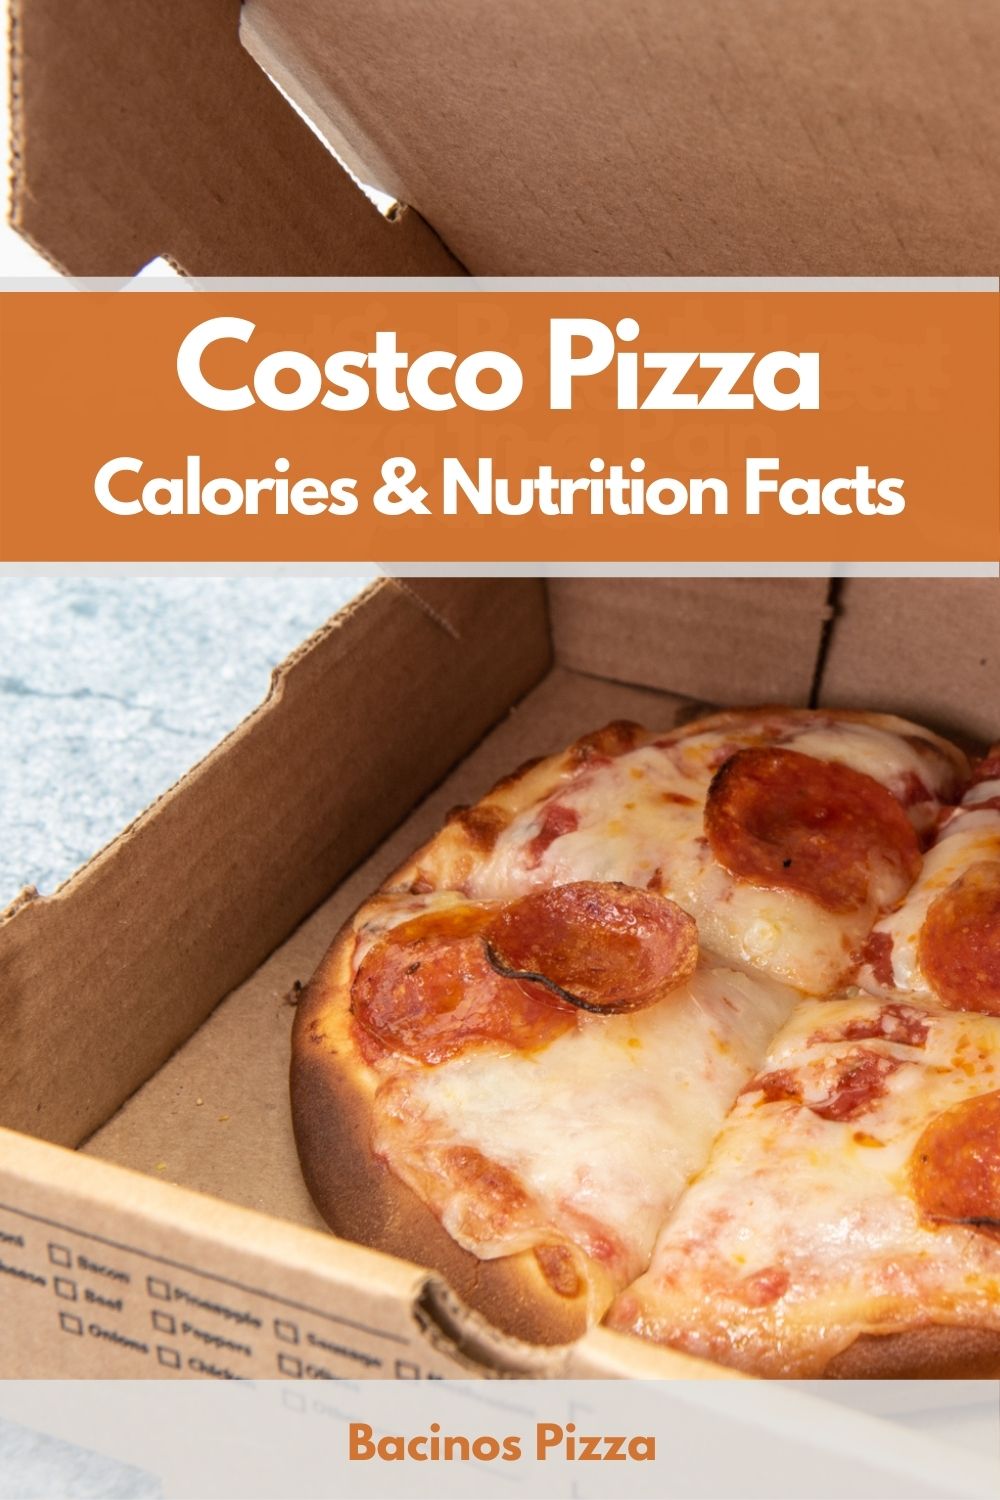 Costco Pizza Calories & Nutrition Facts pin 2